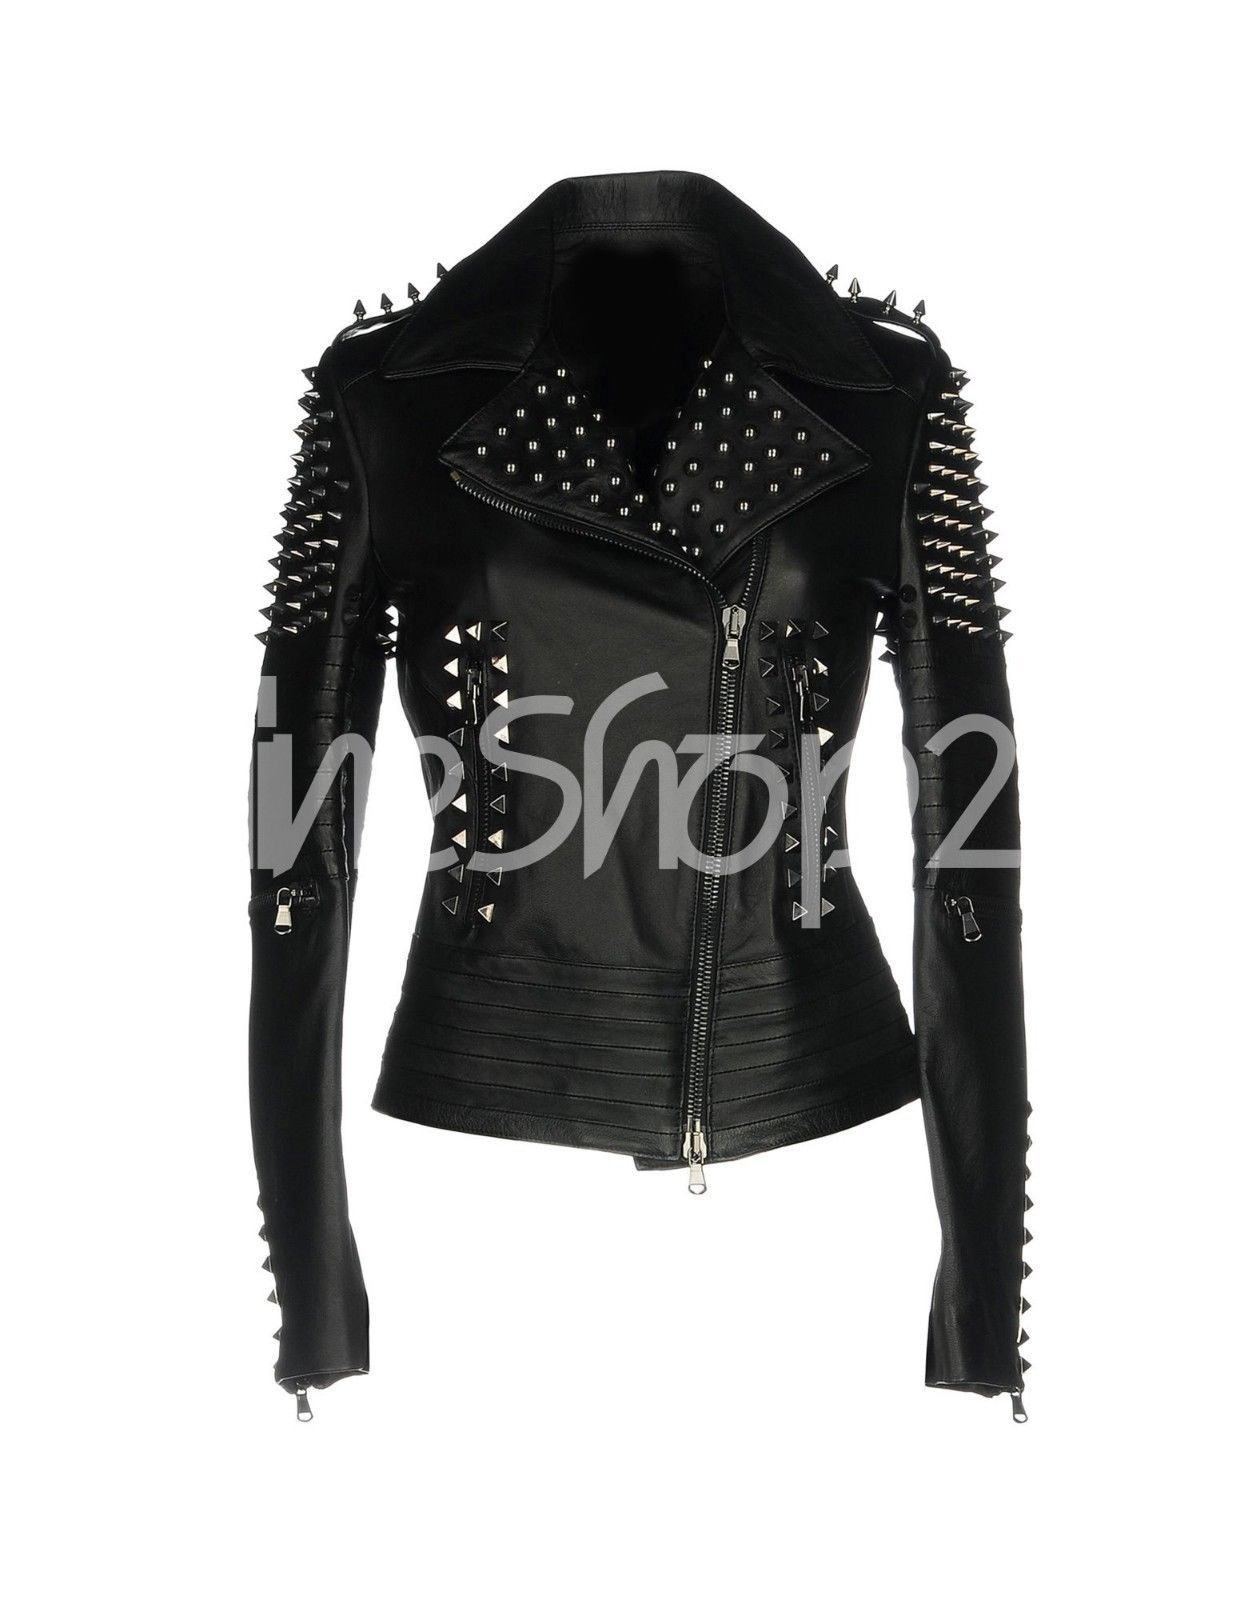 Primary image for New Women Punk Rock Black Full Silver Spiked Studded Brando Biker Leather Jacket